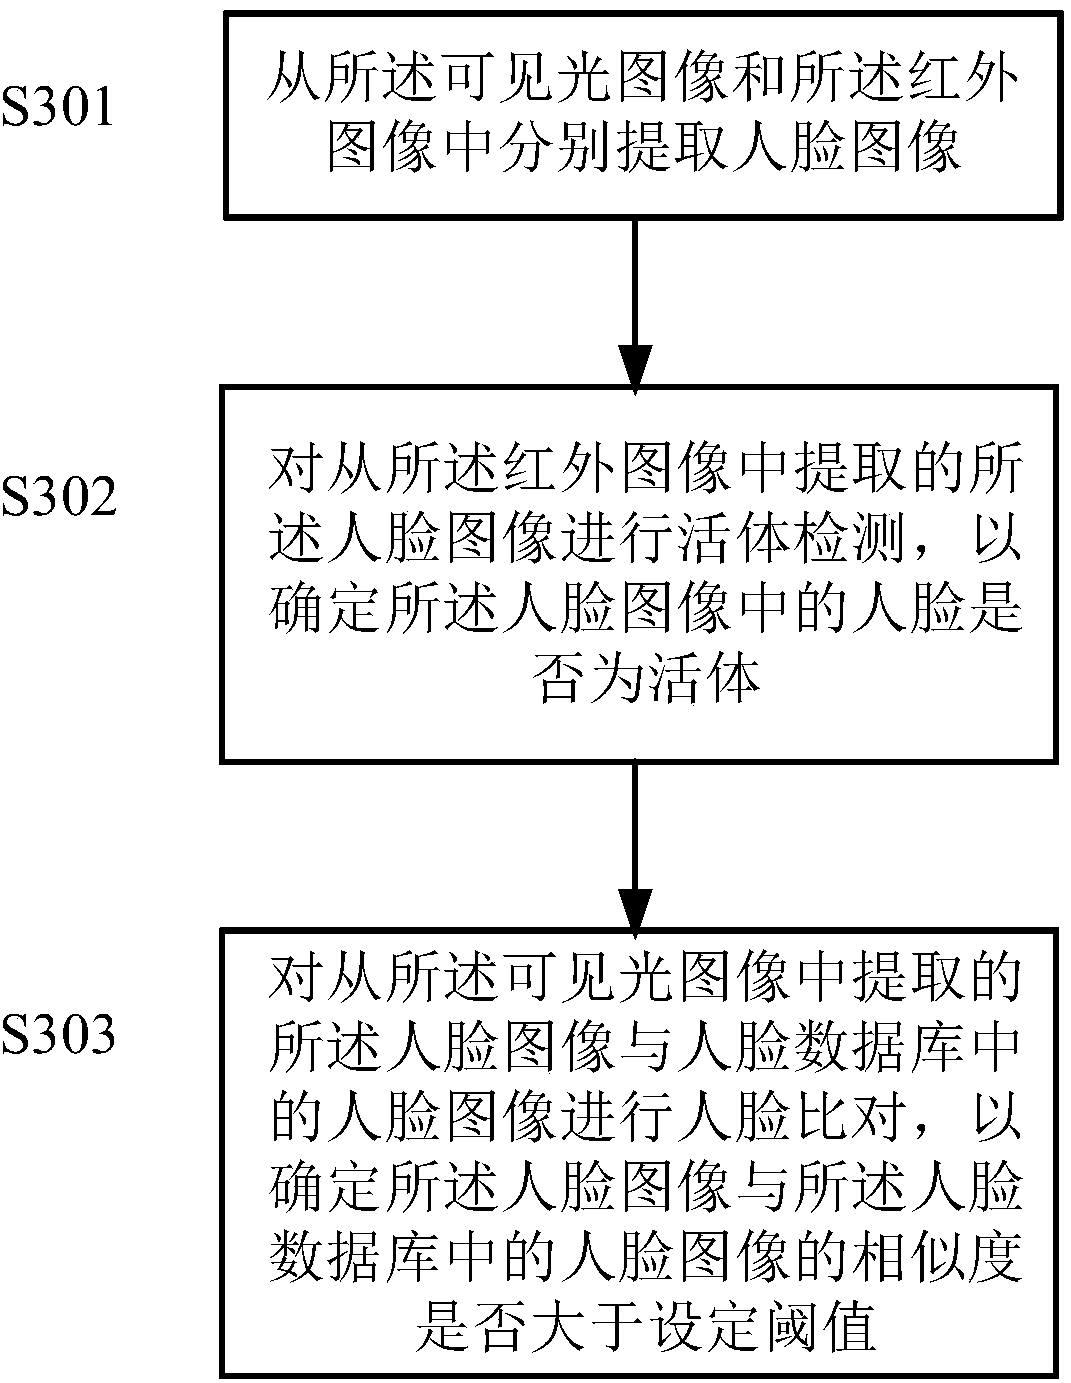 Image acquisition device and image acquisition device-based facial identity verification method